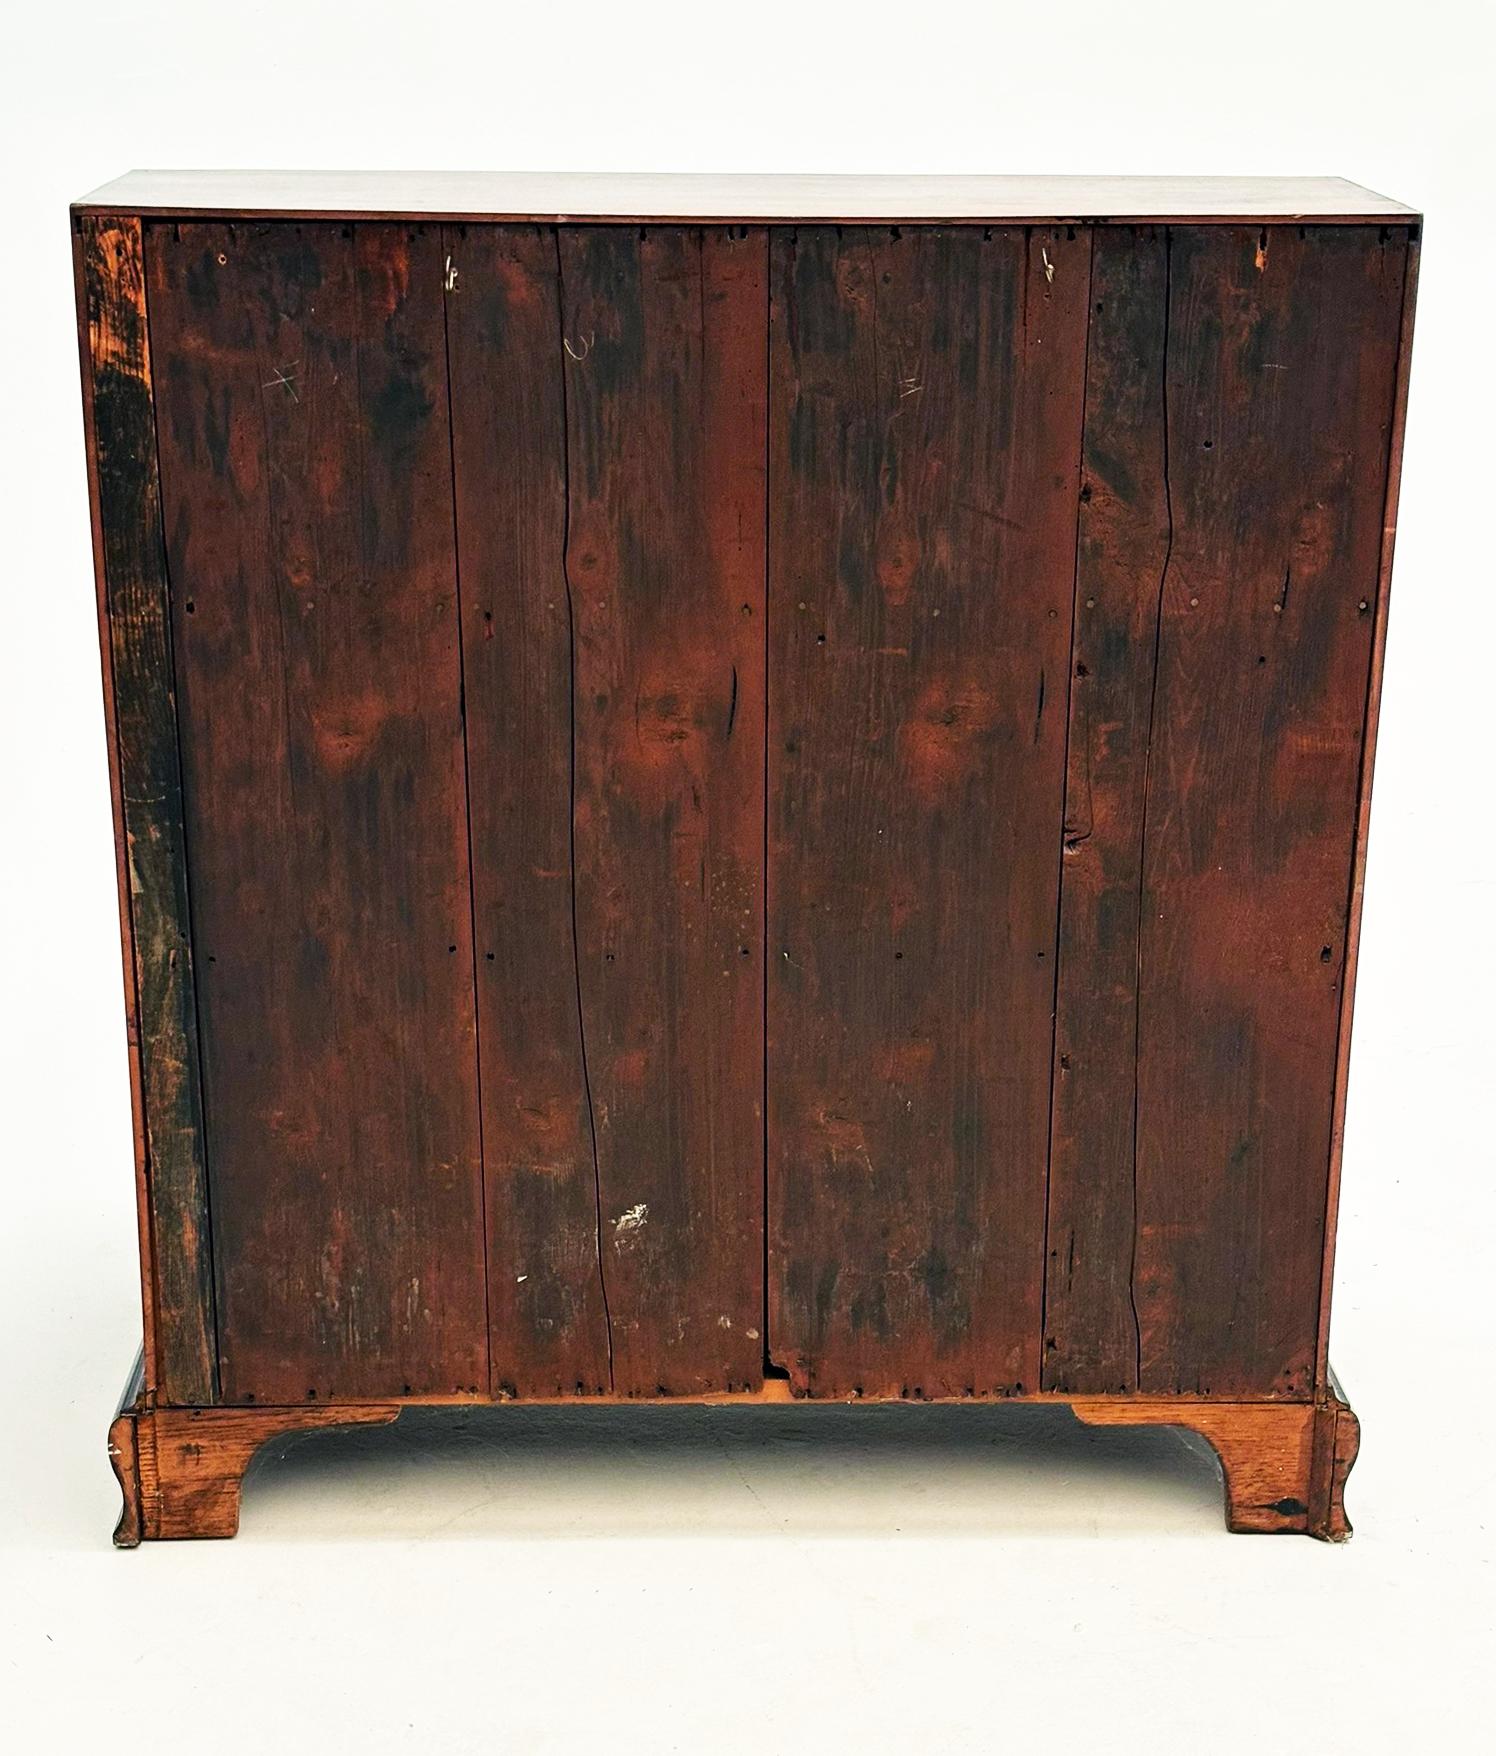 Early 1800's English George III Style Drop Front Desk For Sale 5